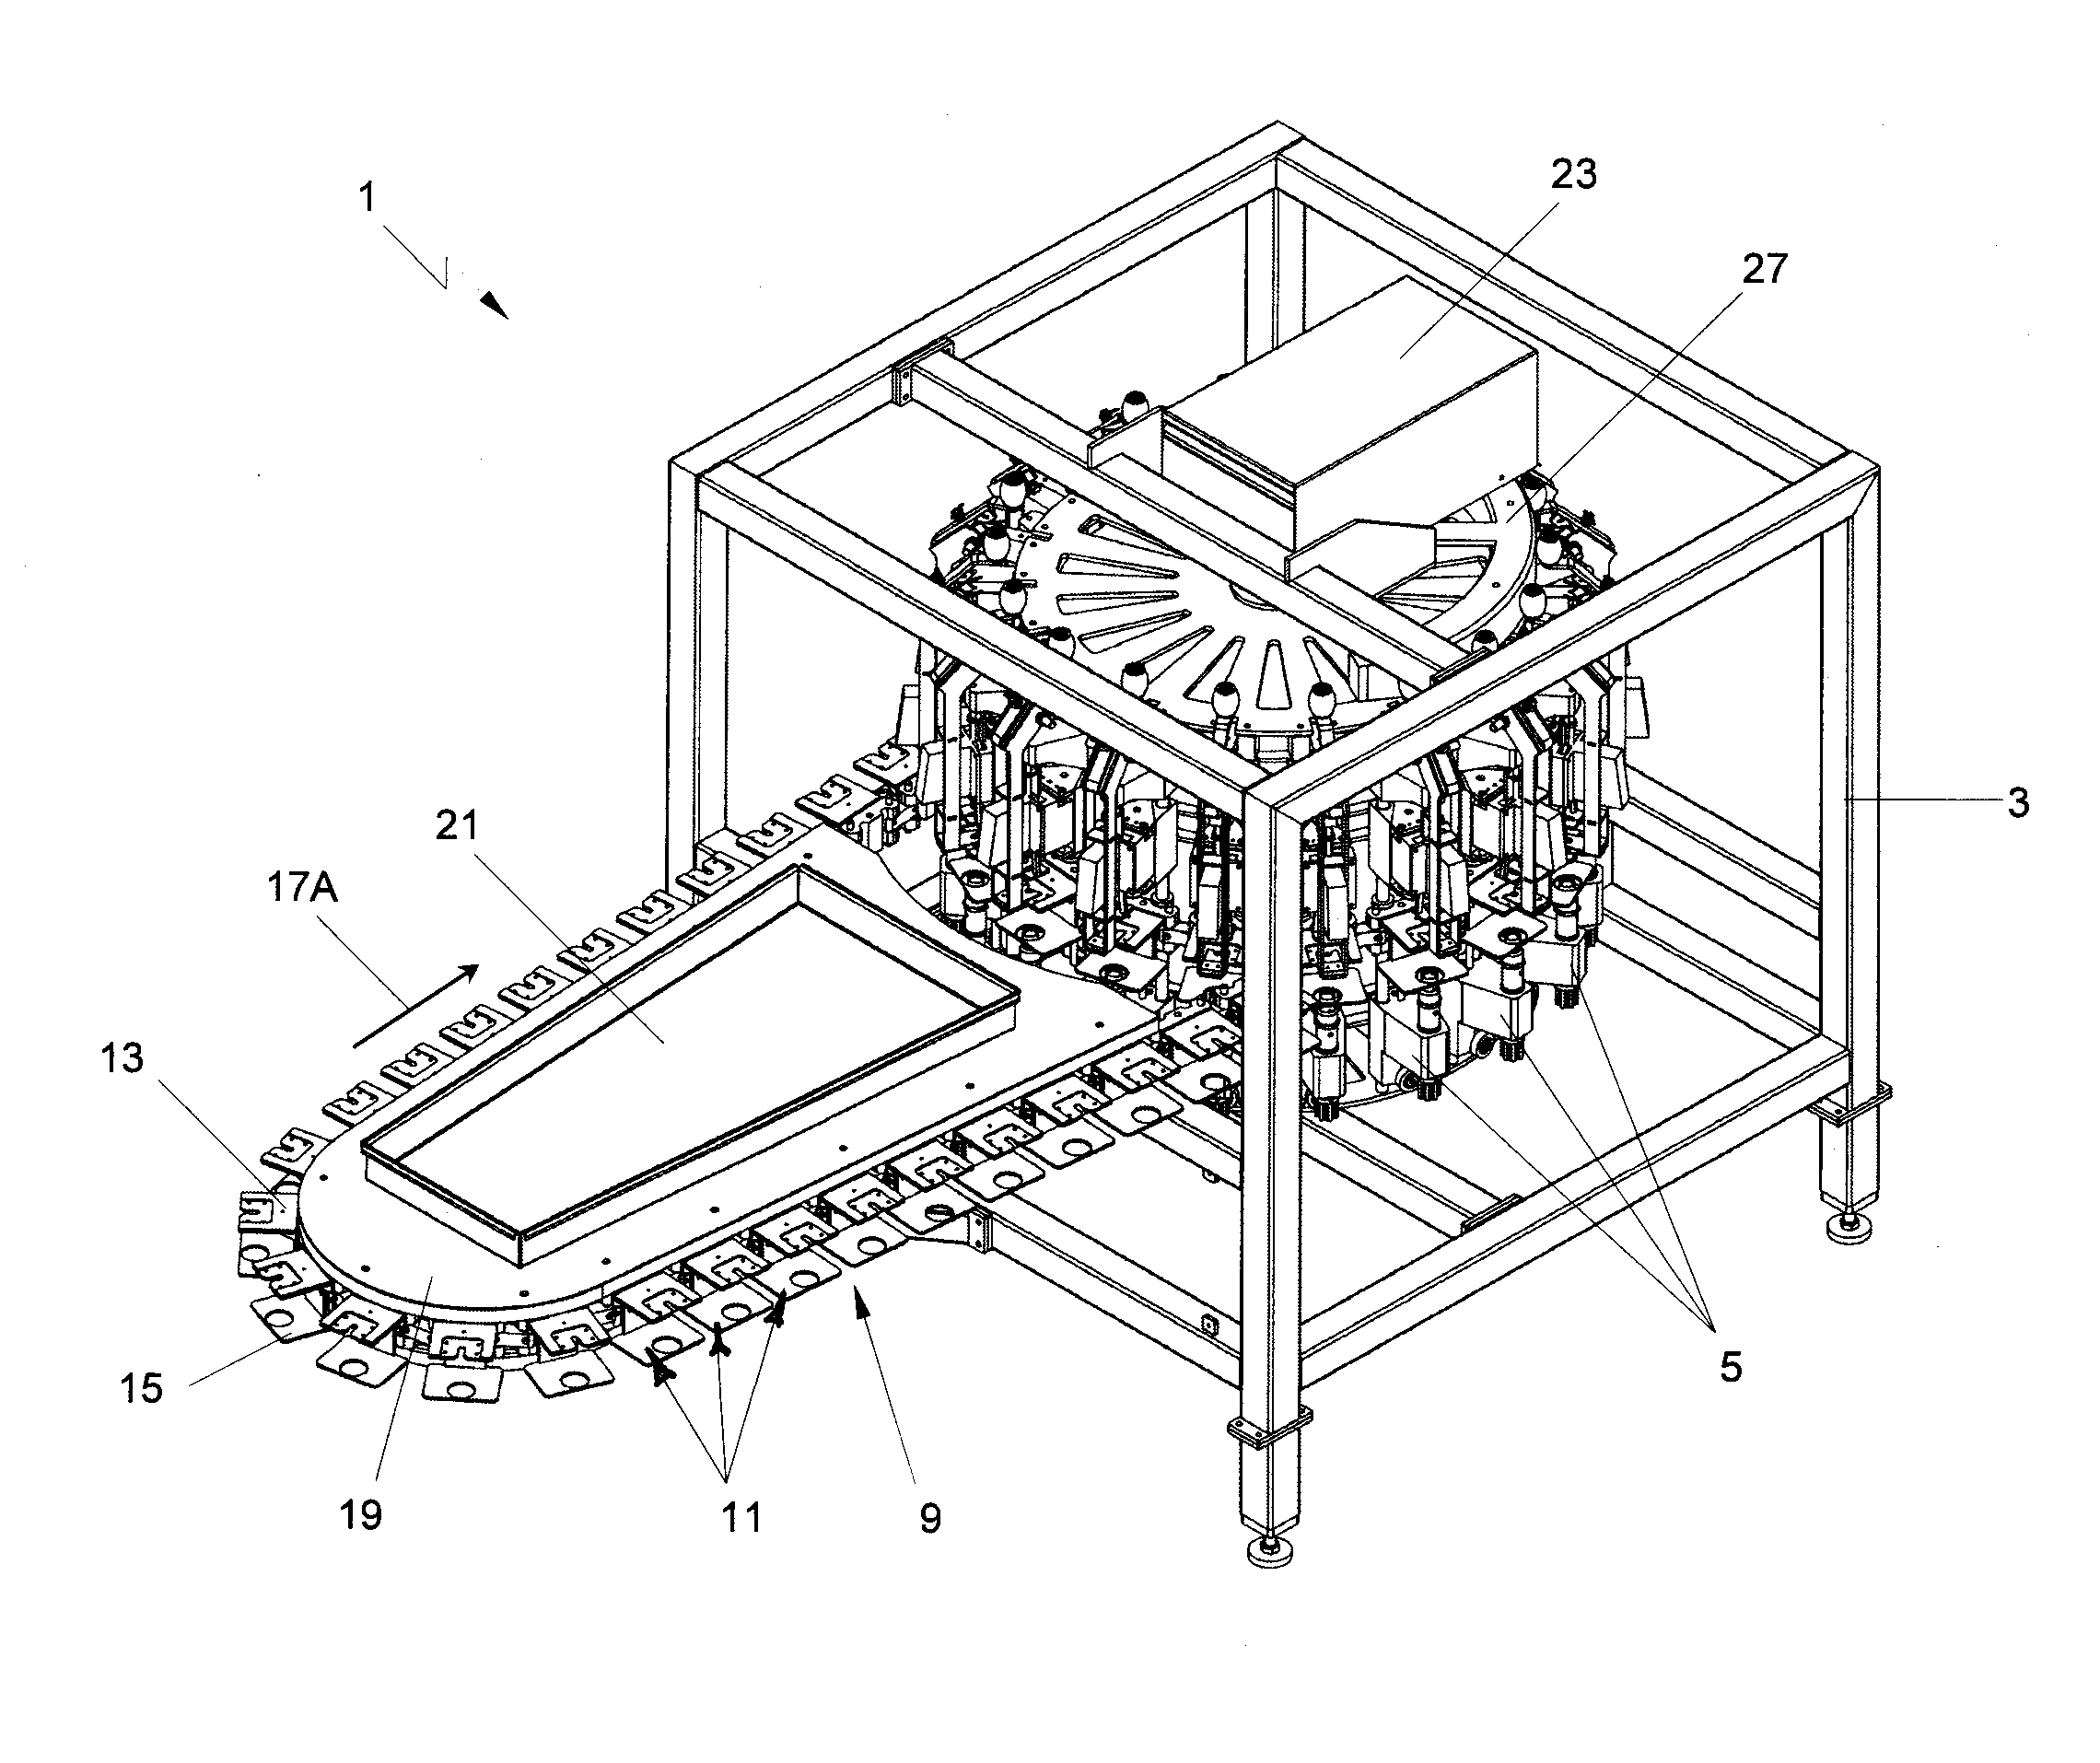 Method and Apparatus for Removing a Sleeve of Meat from an Animal Part Having Bone with Knuckles on Each of its Opposite Ends